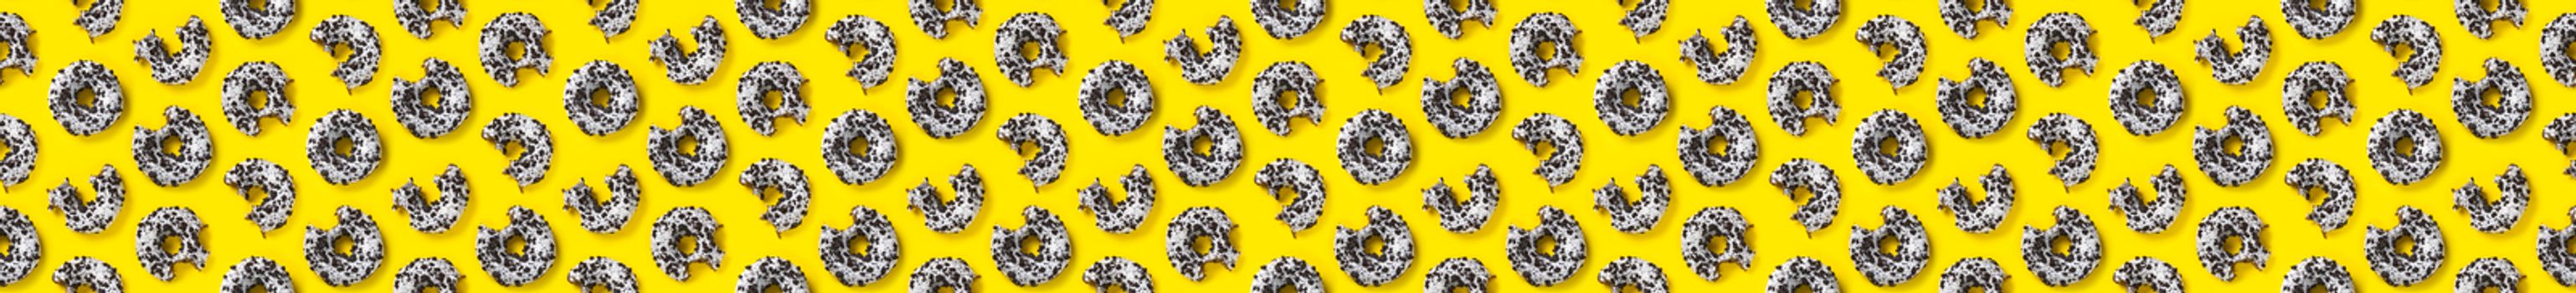 banner donuts on a yellow background top view. Flat lay of delicious nibbled chocolate donuts. used as donut banner or poster background, not pattern.